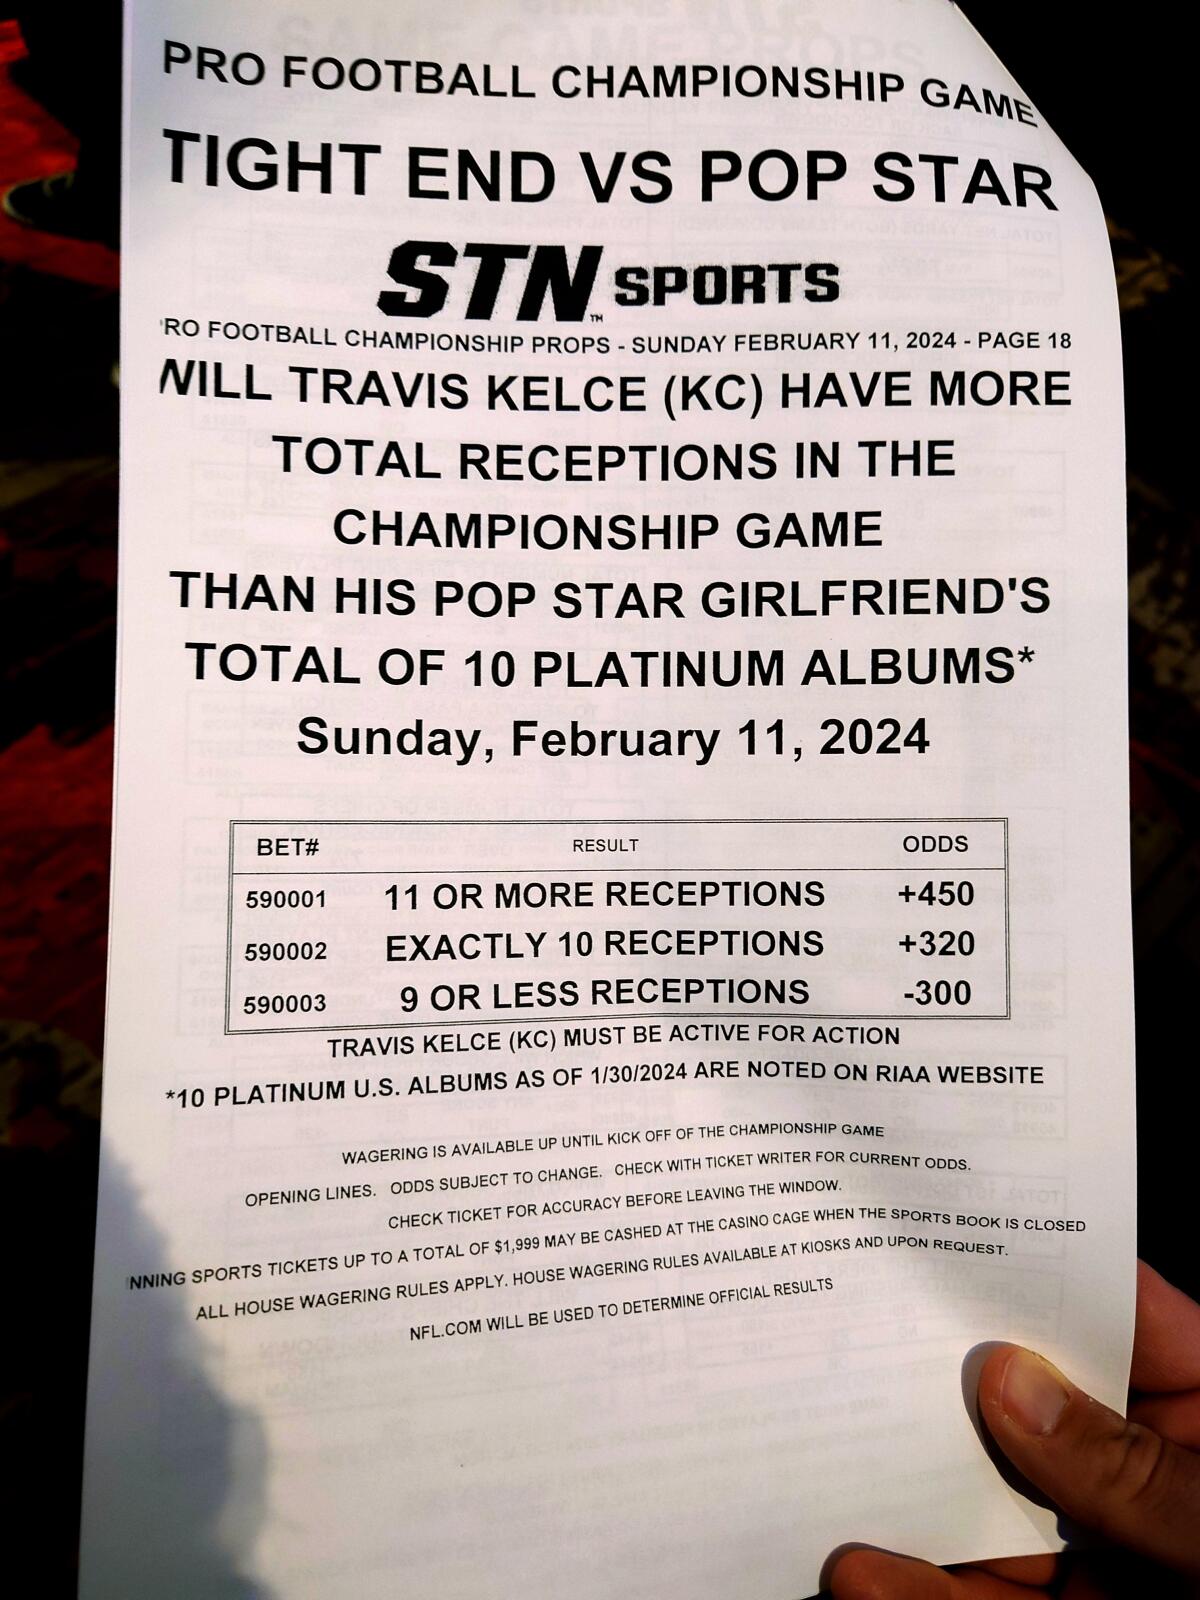 A sports bet is written out asking about Taylor Swift and Travis Kelce